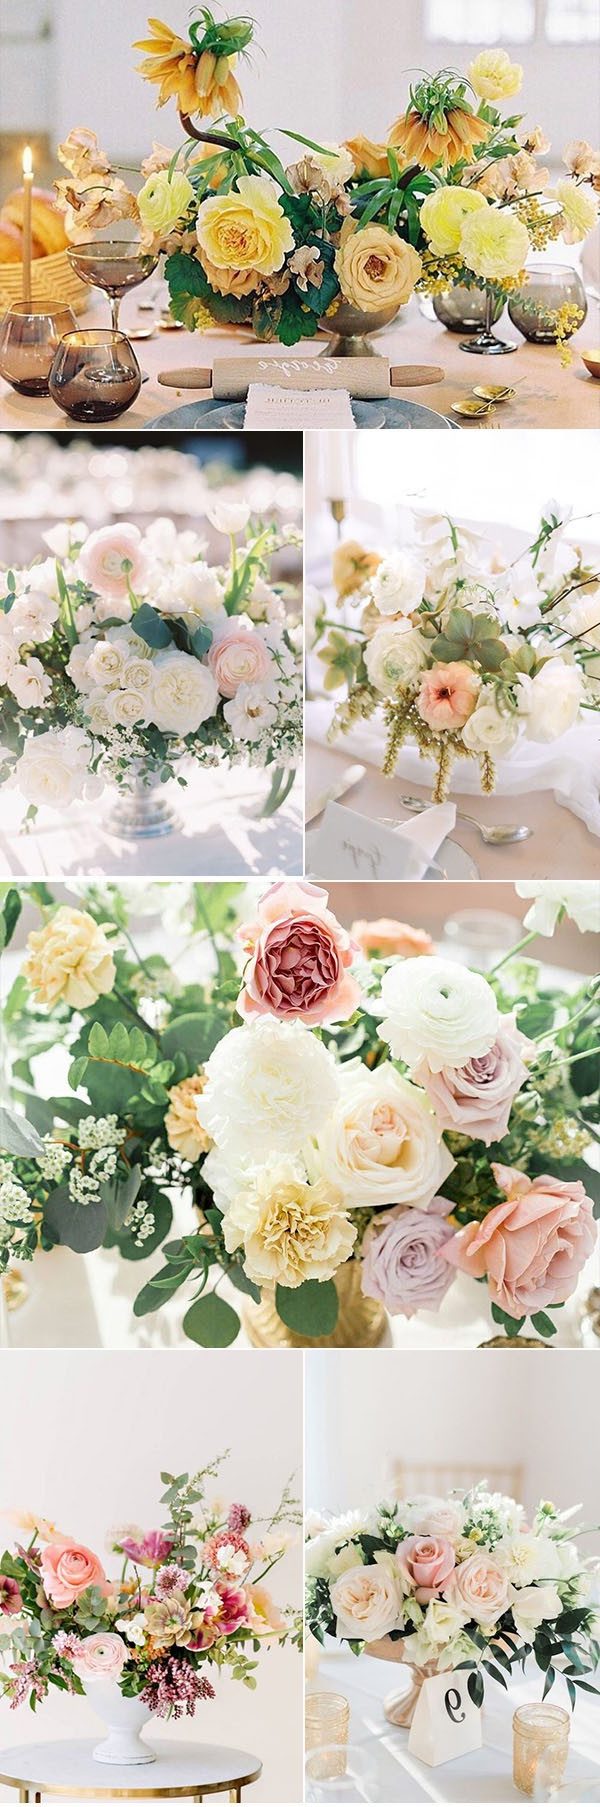 romantic wedding centerpieces ideas yellow and pink flower